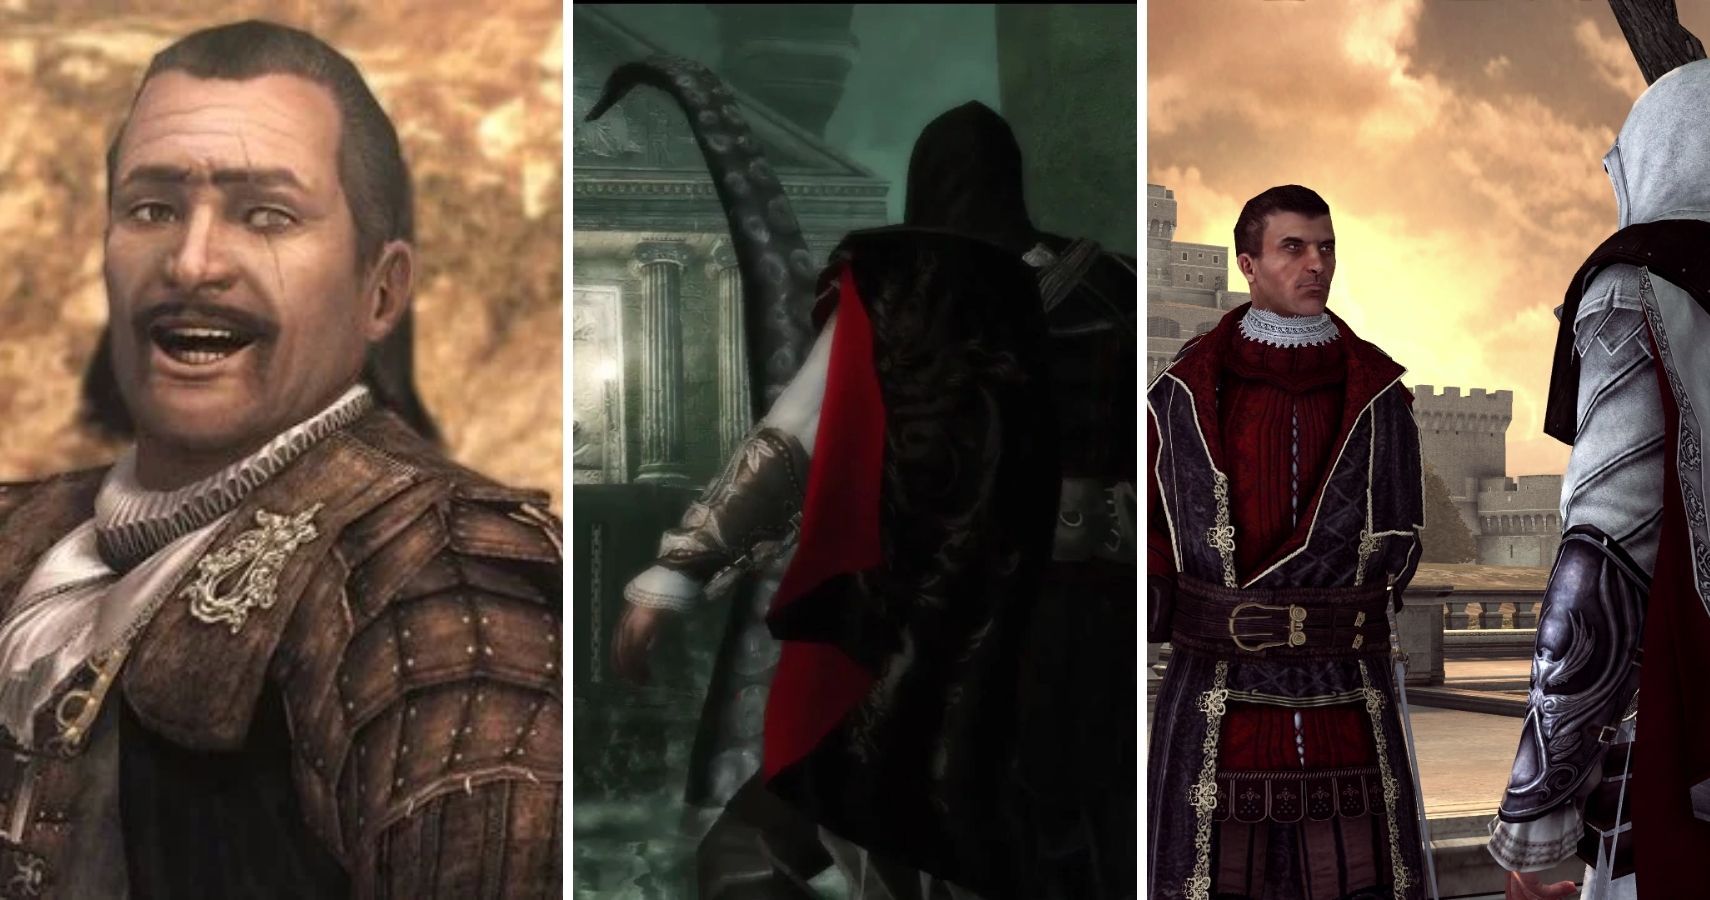 Will There Be An Assassin's Creed 2?